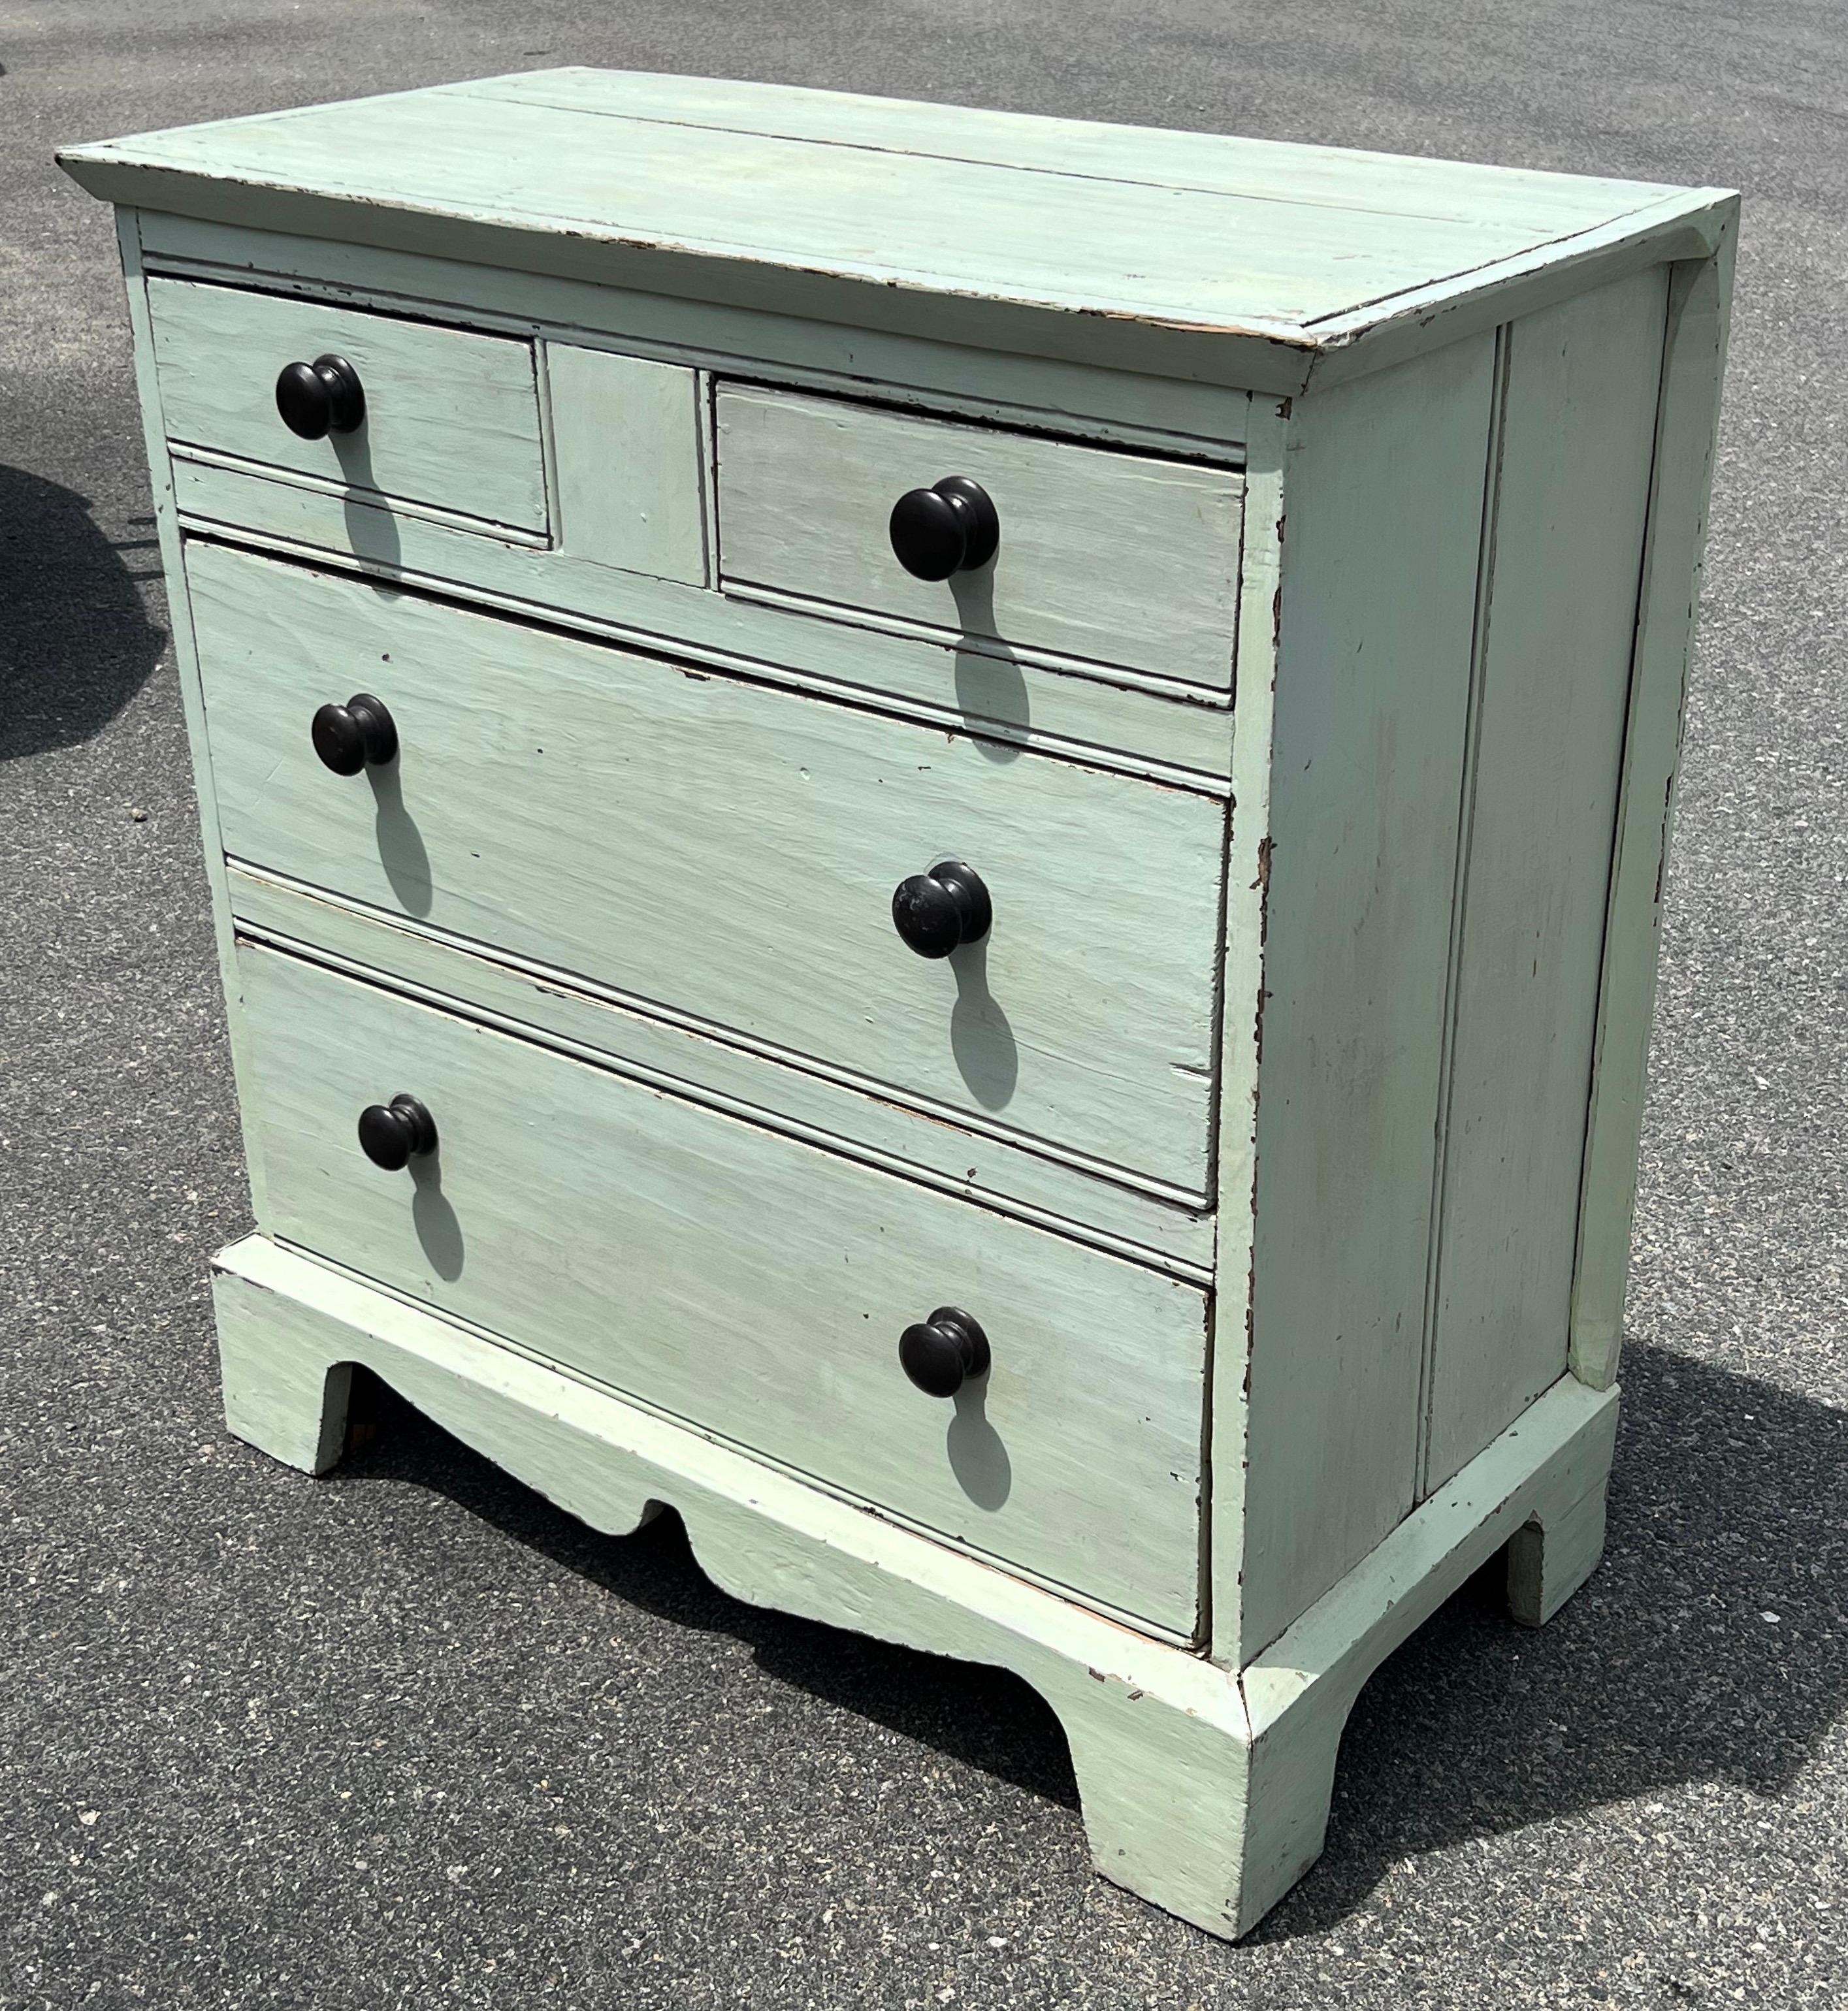 19th century Pine dresser with two side-by-side drawers over two lower drawers, beaded two-board sides and shaped, bracket base. In original mint green paint with black wood knobs.